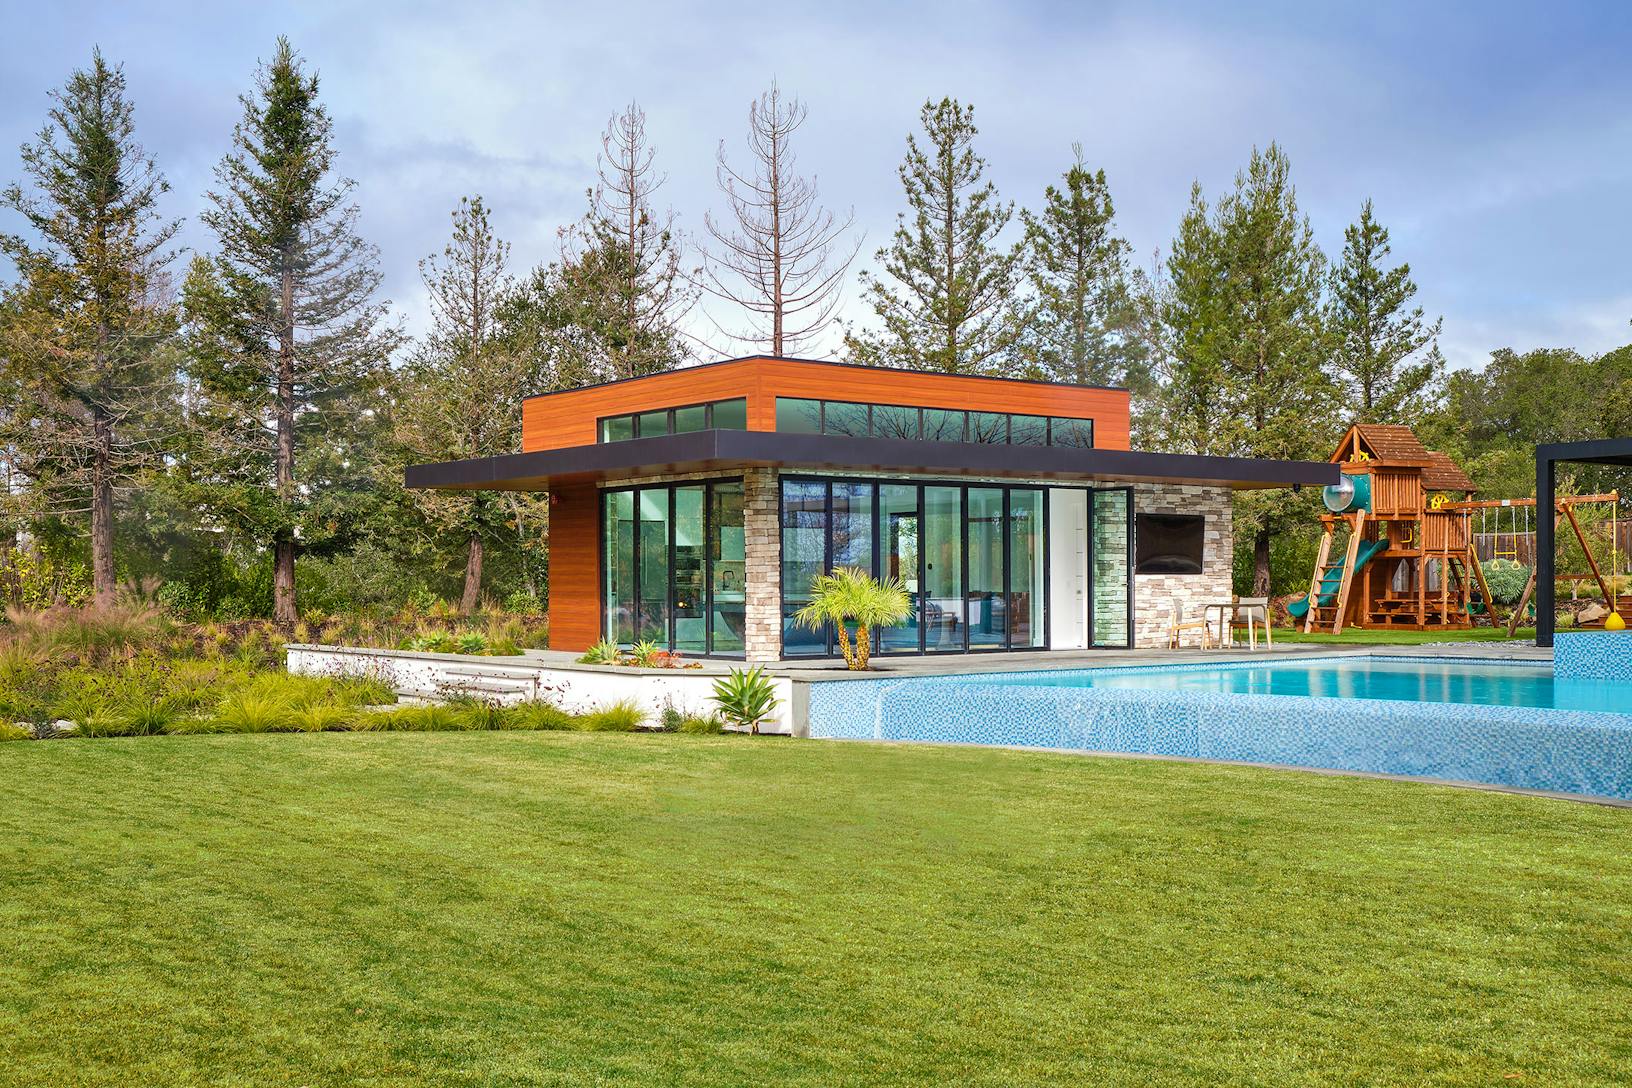 Contemporary pool house with bifold glass walls creating an indoor/outdoor area